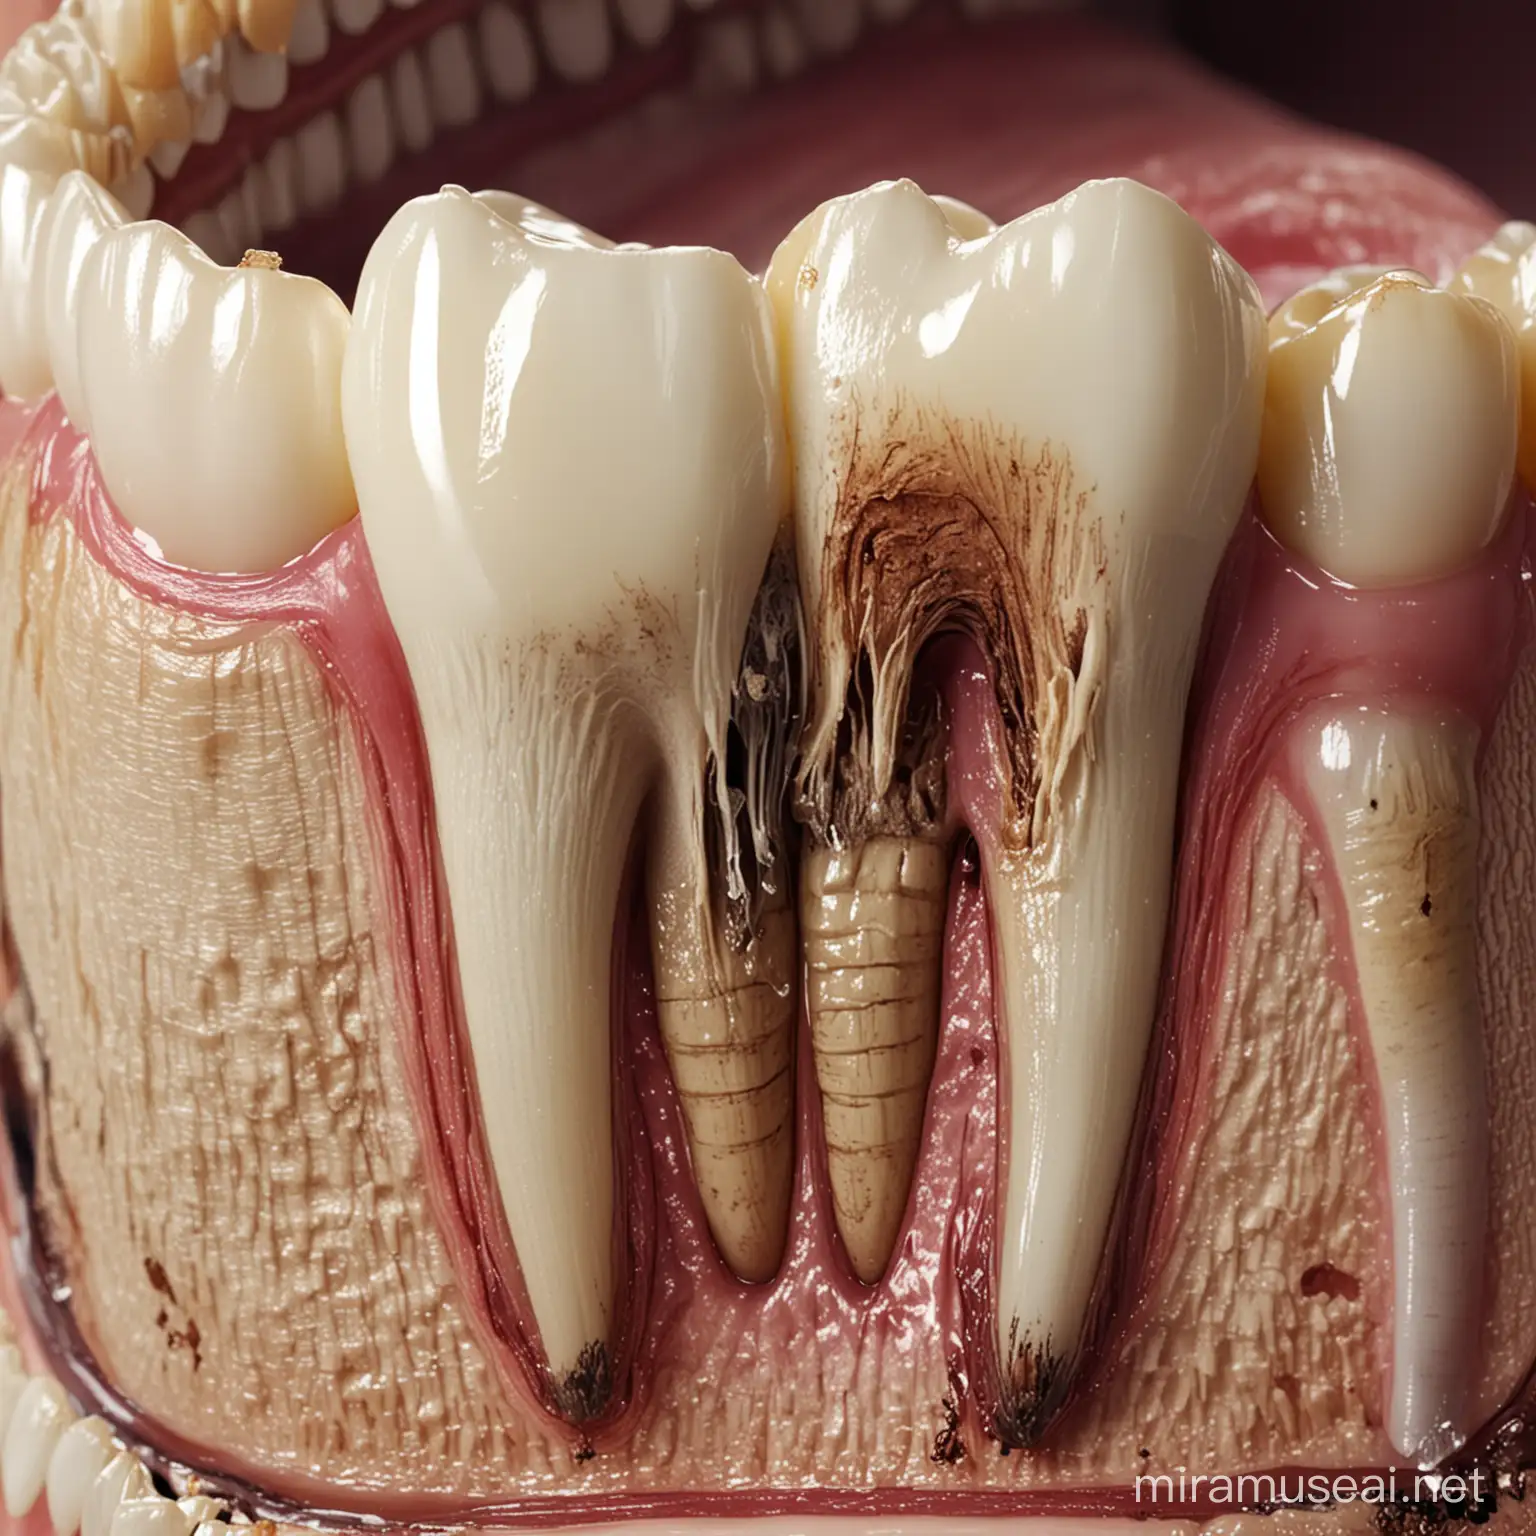 Illustration of a Decaying Tooth with Visible Cavities and Decay